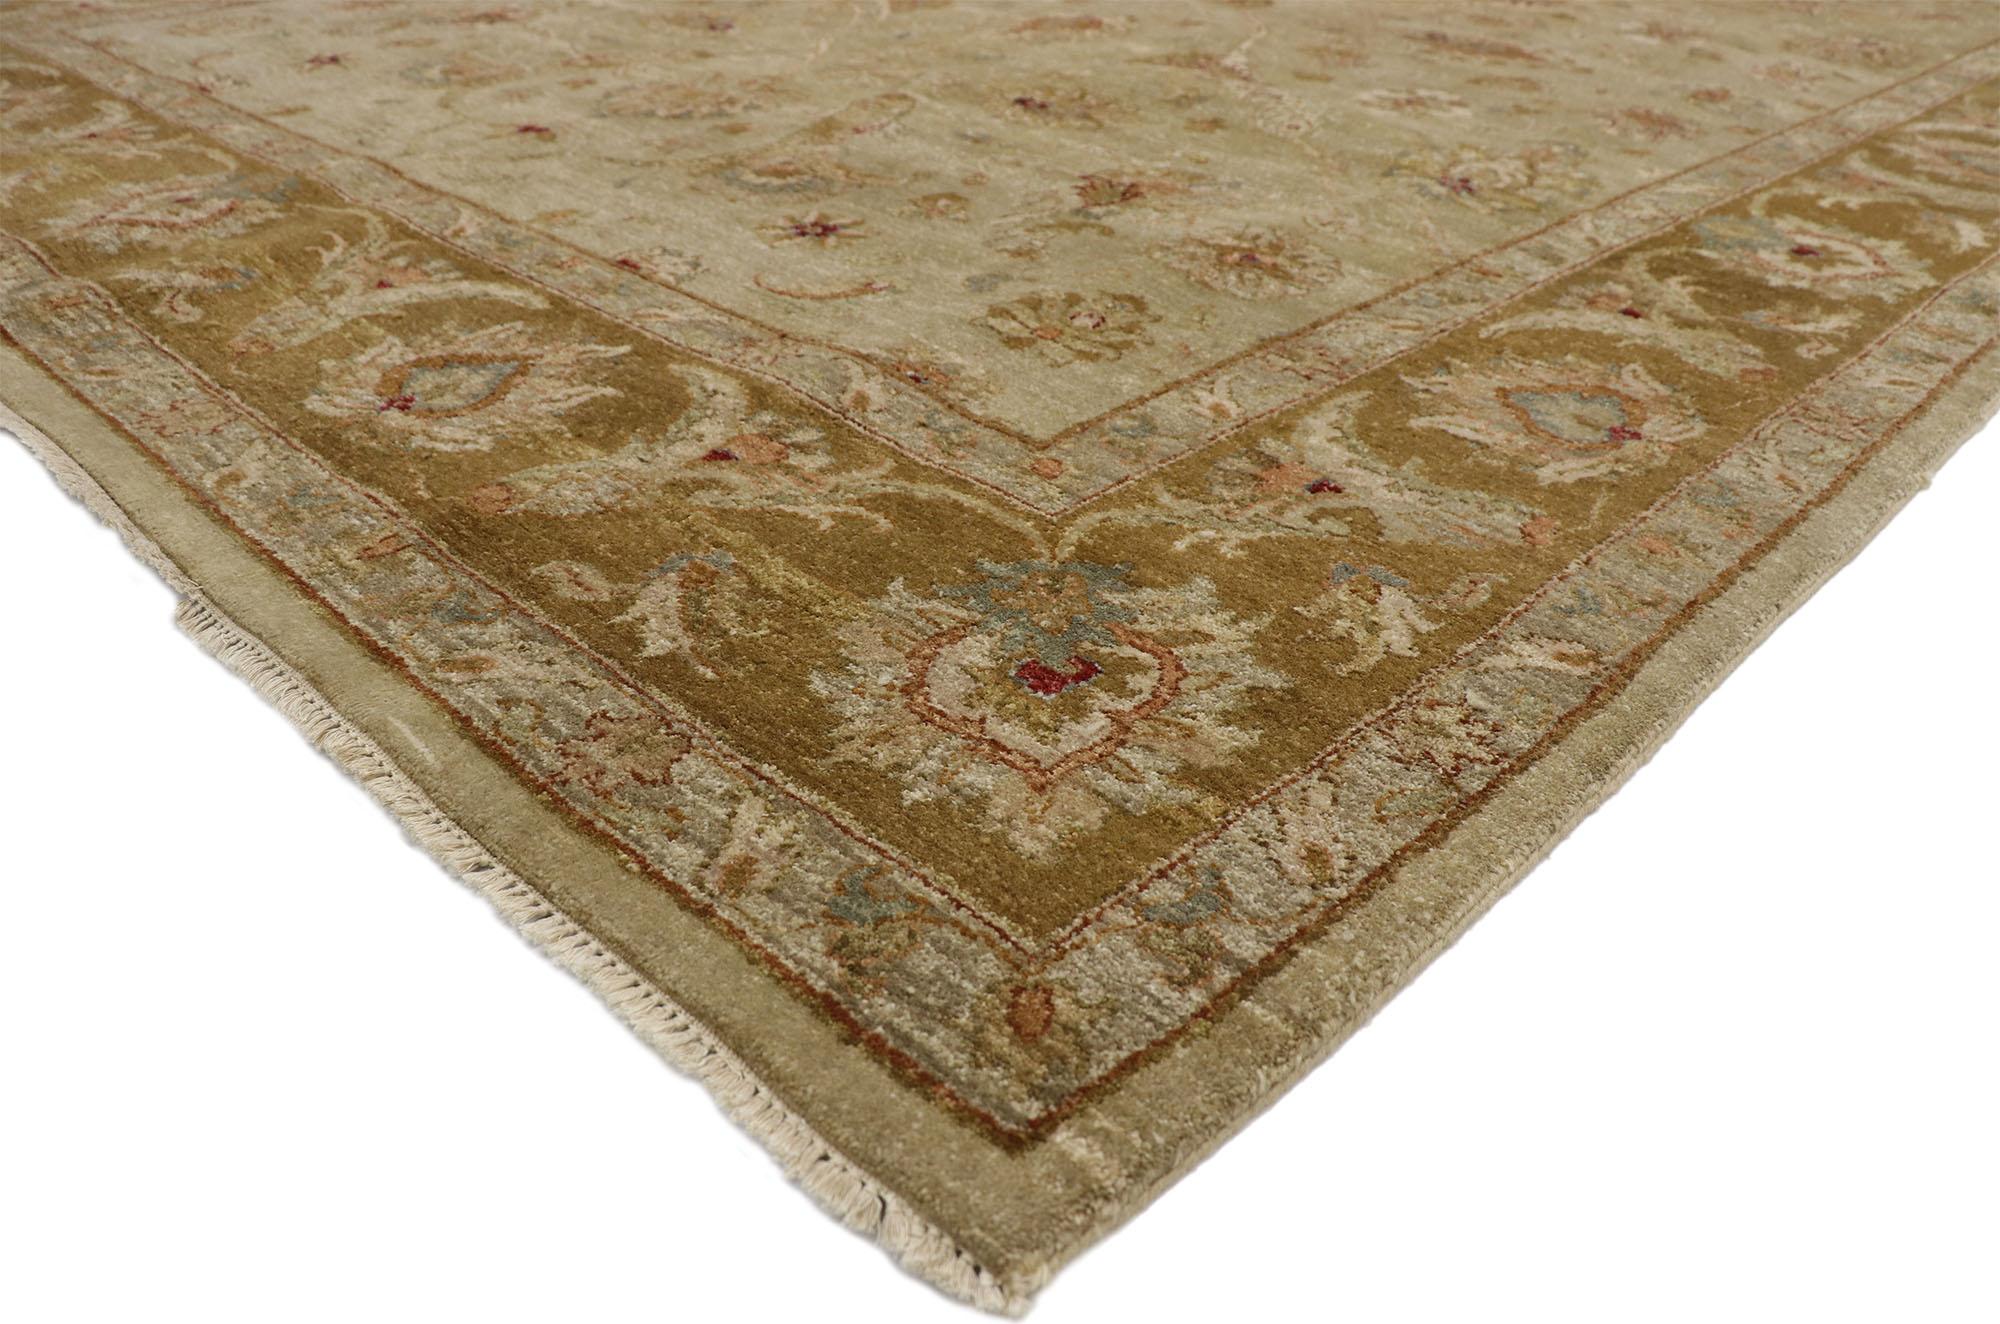 77366, vintage Indian rug with Arts & Crafts Bungalow style. With its neutral colors and weathered beauty combined with nostalgic charm, this vintage Indian rug creates an inimitable warmth and calming ambiance. Large harshang palmettes, serrated